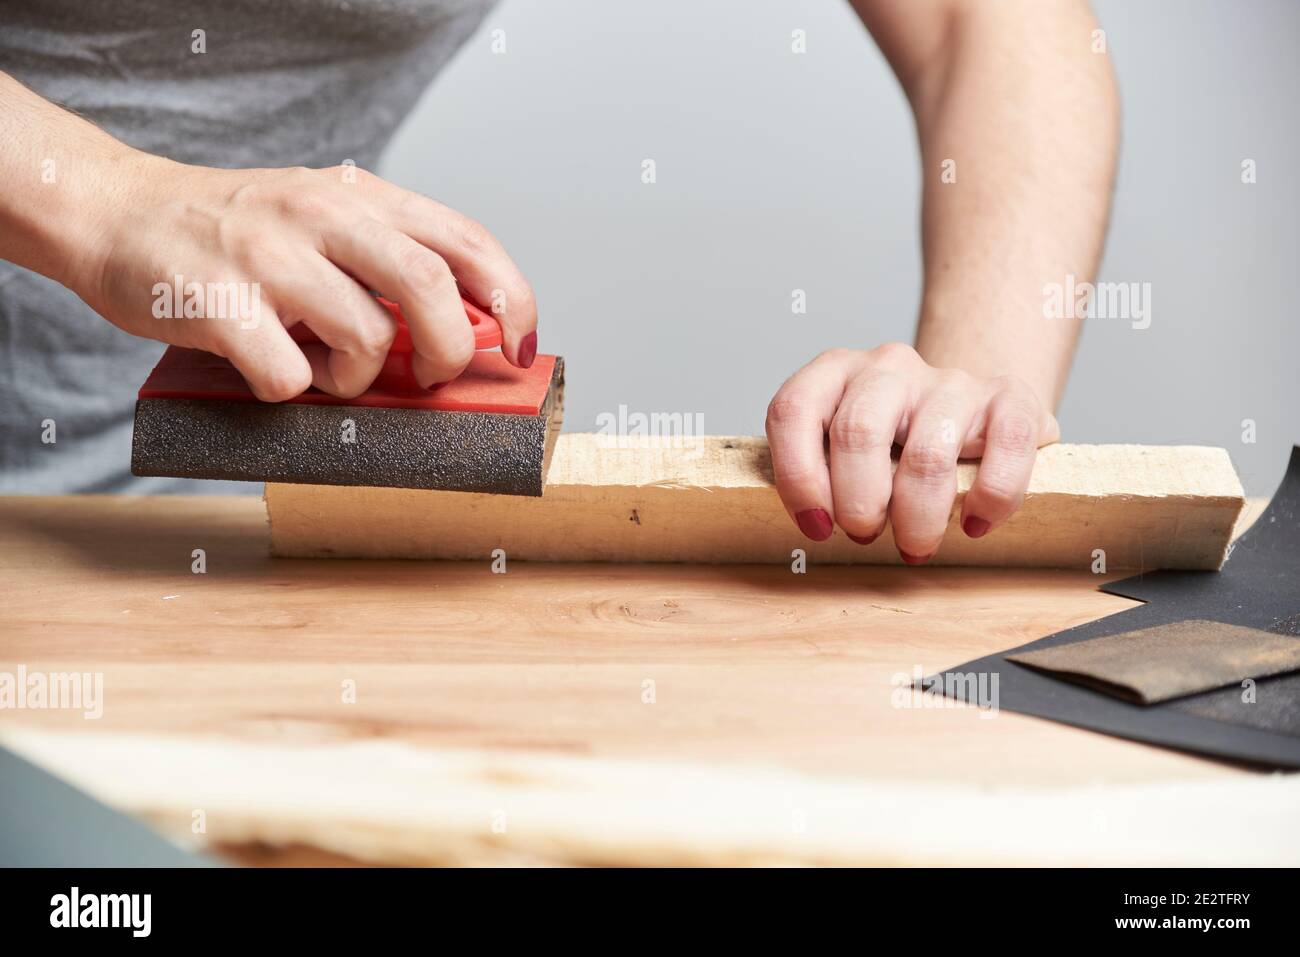 Woman fond of carpentry. Hands of a young woman with her nails done sanding wood with sandpaper. Stock Photo